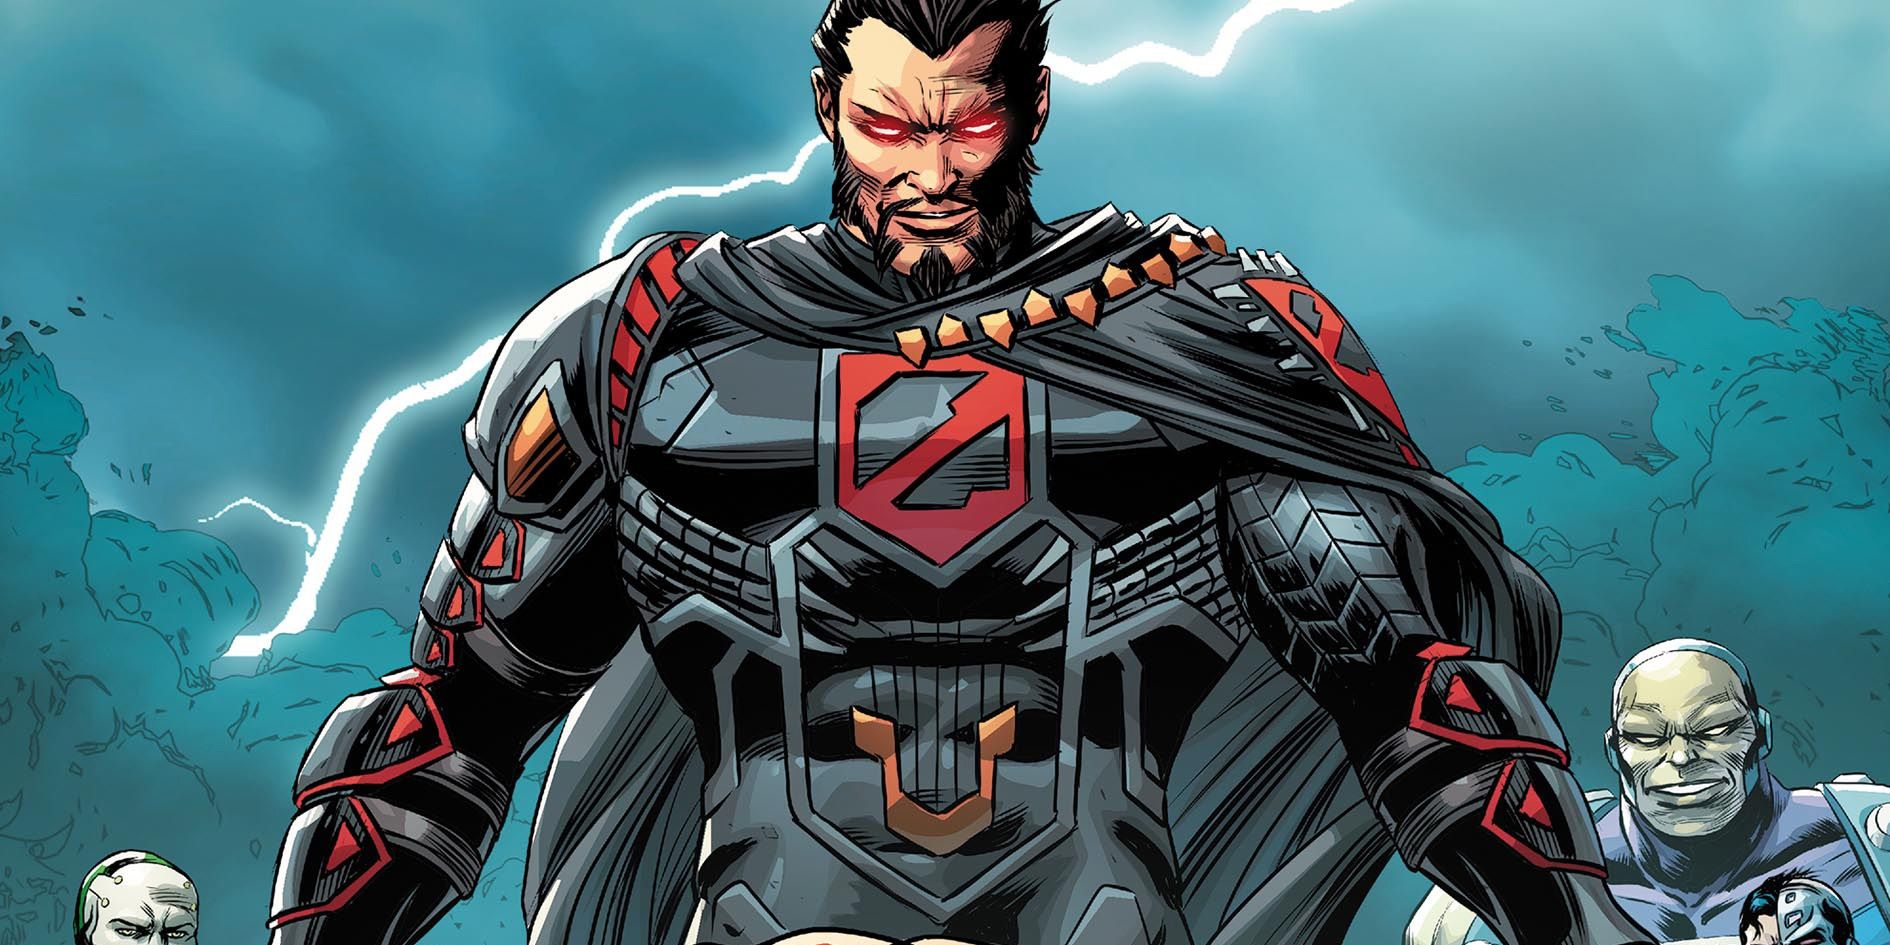 General Zod with lightning striking behind him in DC Comics.